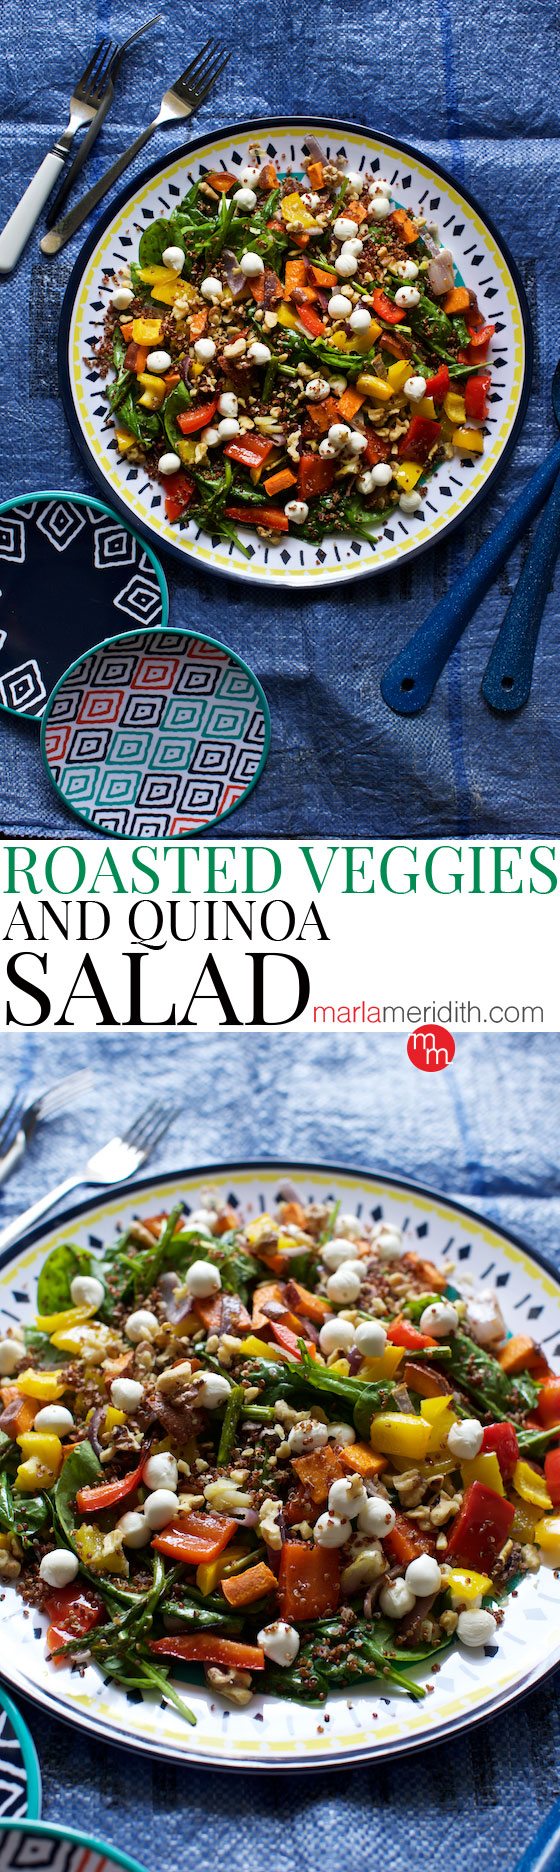 ROASTED VEGGIES AND QUINOA SALAD W /CILANTRO LIME DRESSING. This wholesome #meatlessmonday dish is filled with summers best produce! MarlaMeridith.com ( @marlameridith )